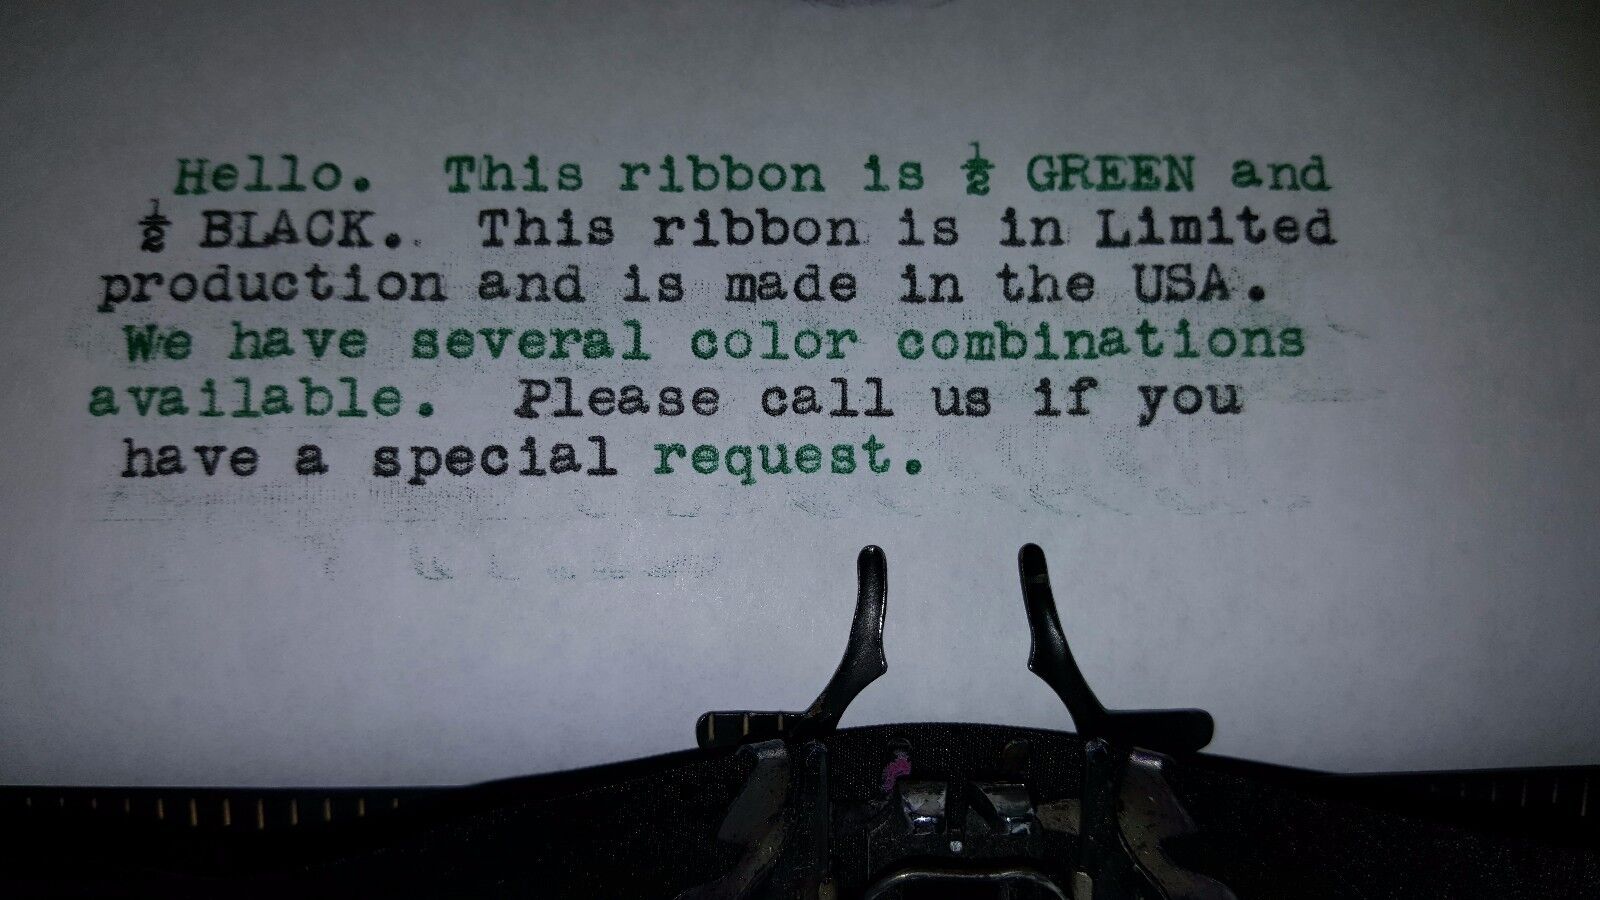 Royal Quiet Deluxe Typewriter Ribbon - Black and Green Ink Ribbon - Made in USA